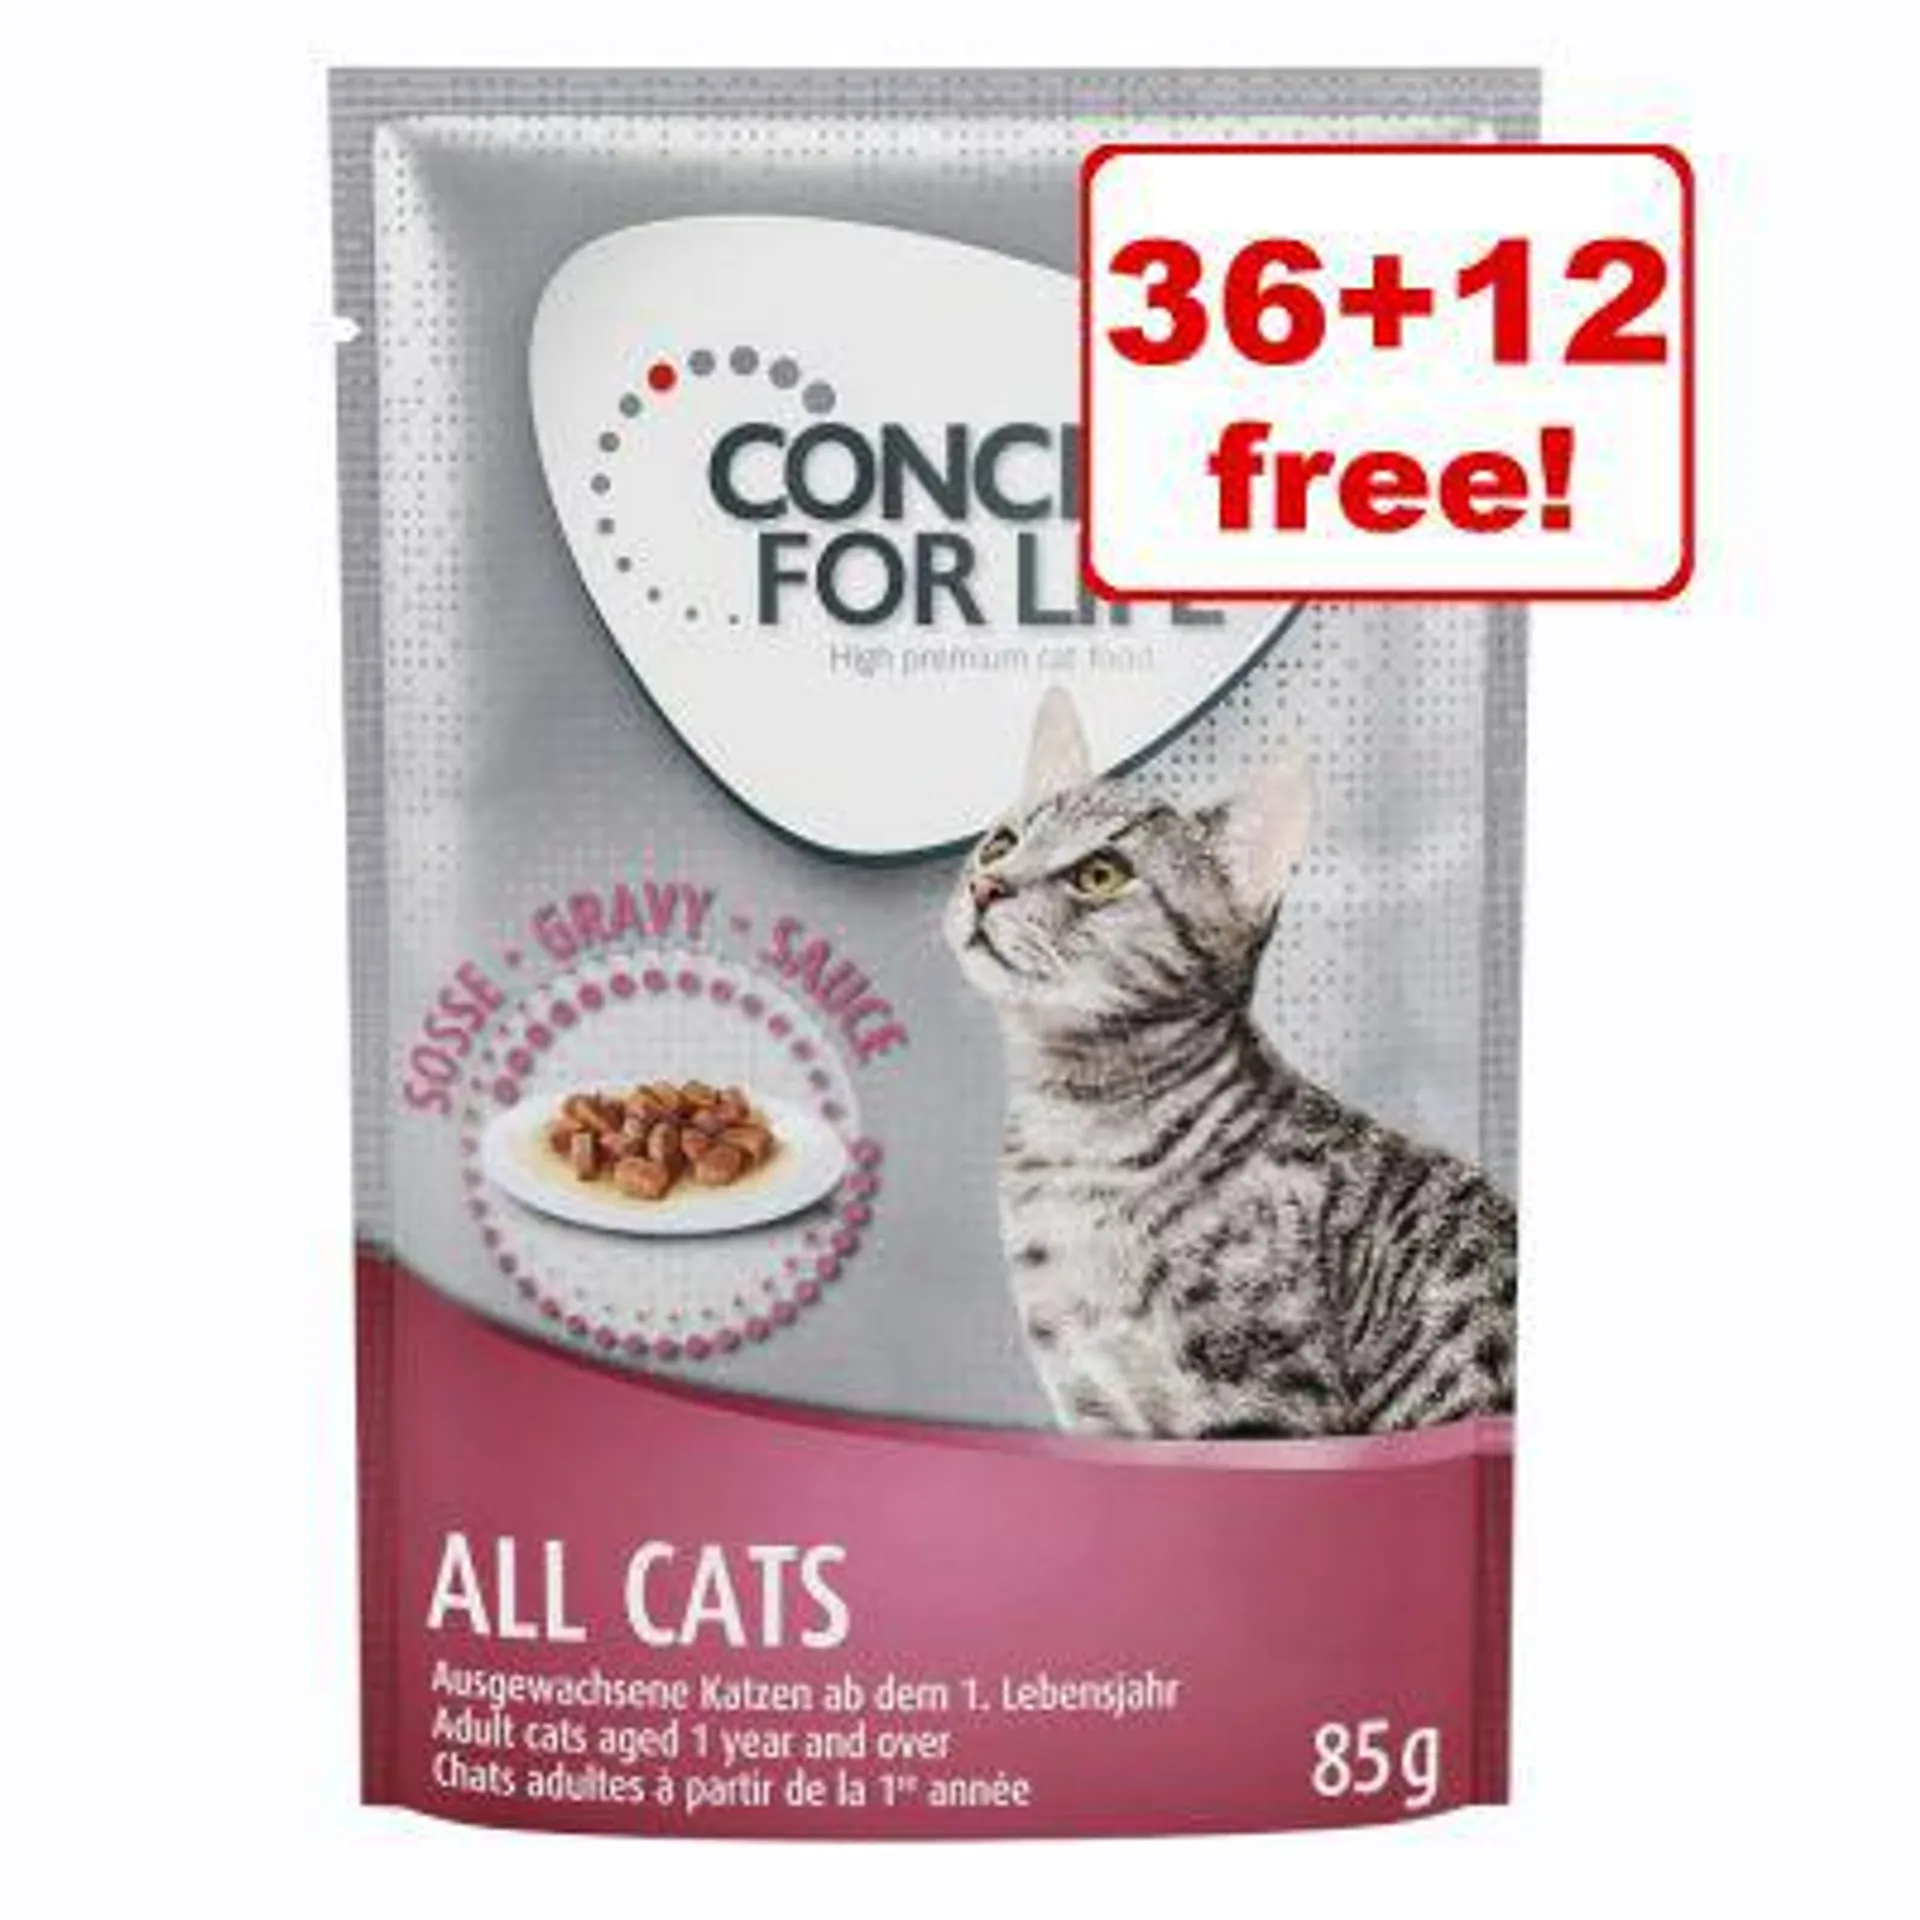 48 x 85g Concept for Life Wet Cat Food - 36 + 12 Free!*